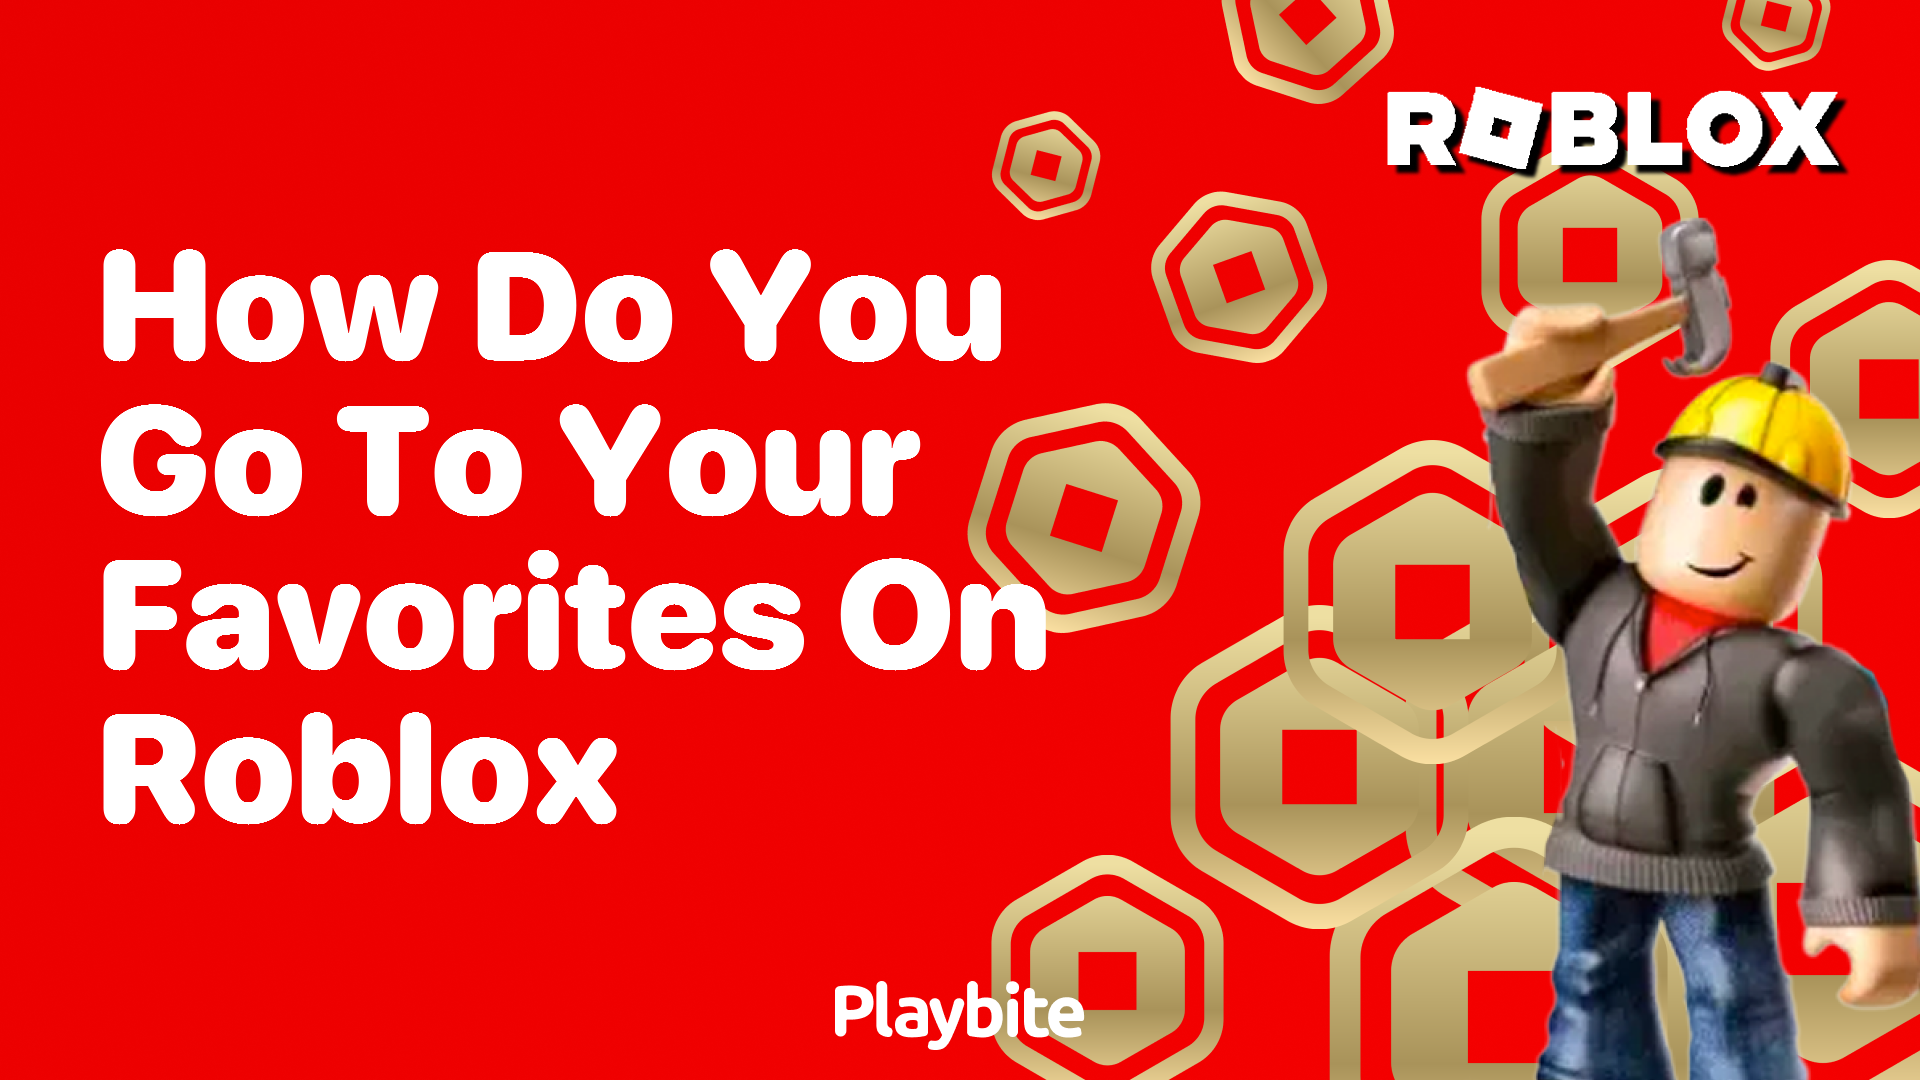 How Do You Go to Your Favorites on Roblox?